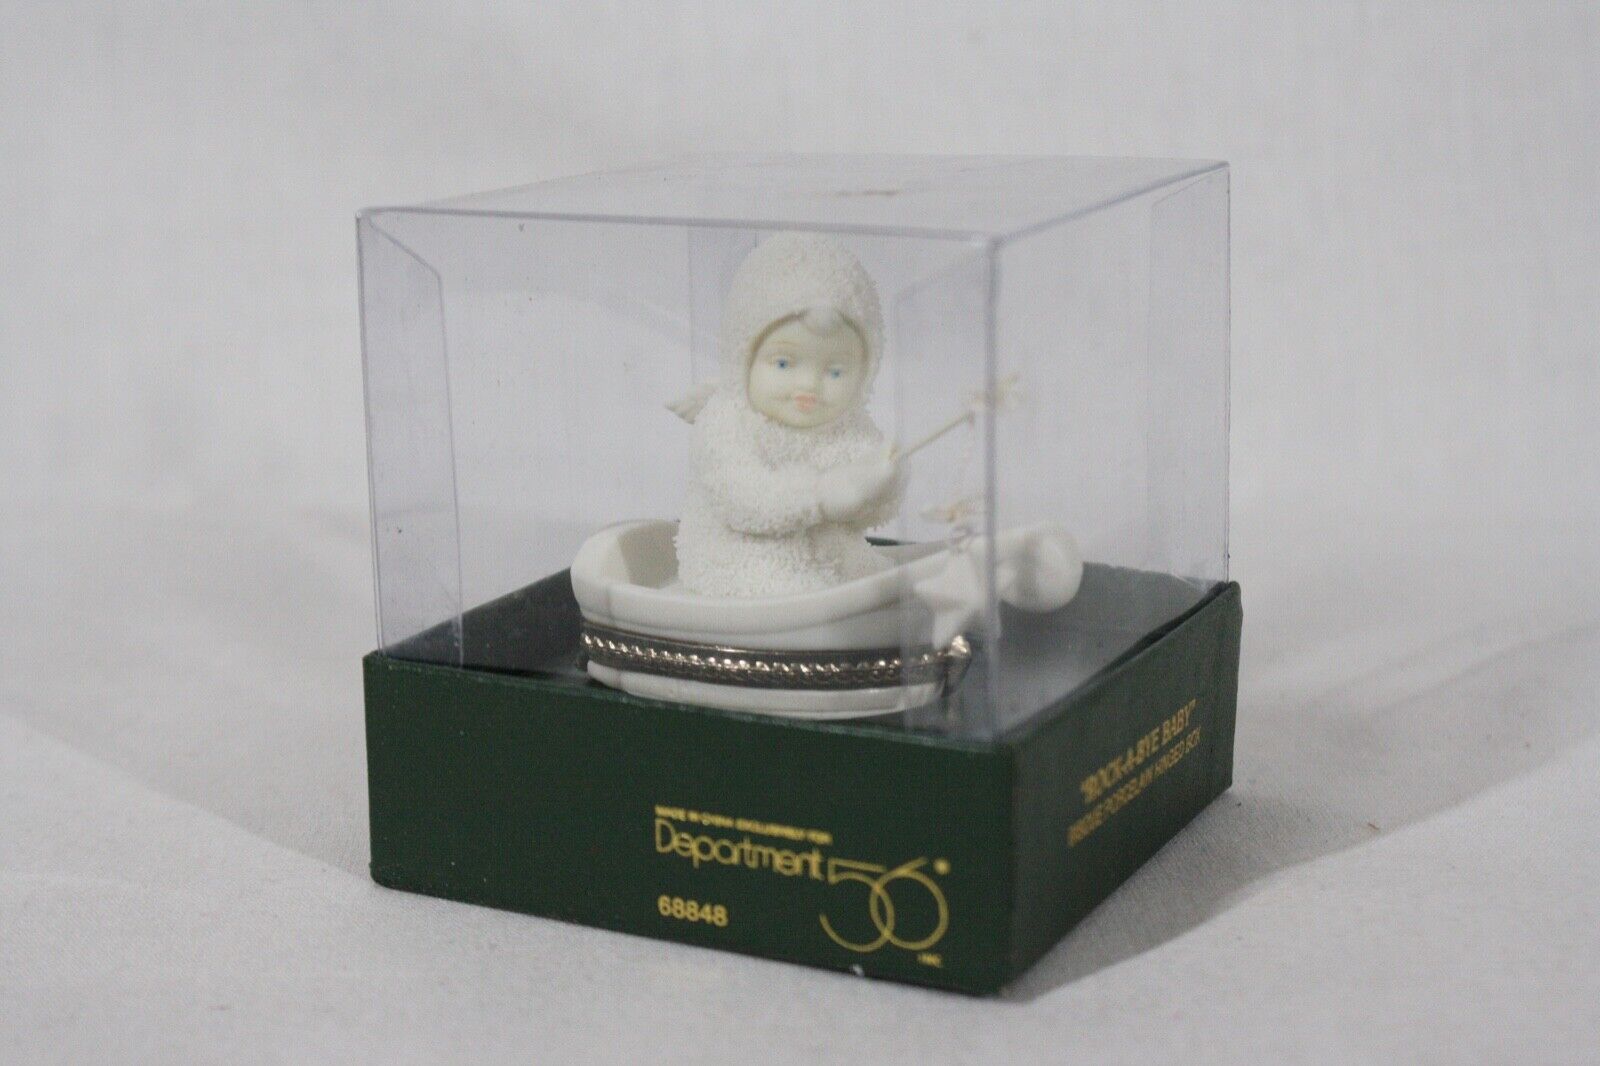 RARE DISCONTINUED SNOWBABIES DEPARTMENT 56 ROCK A BYE BABY ITEM 68848 NEW IN BOX